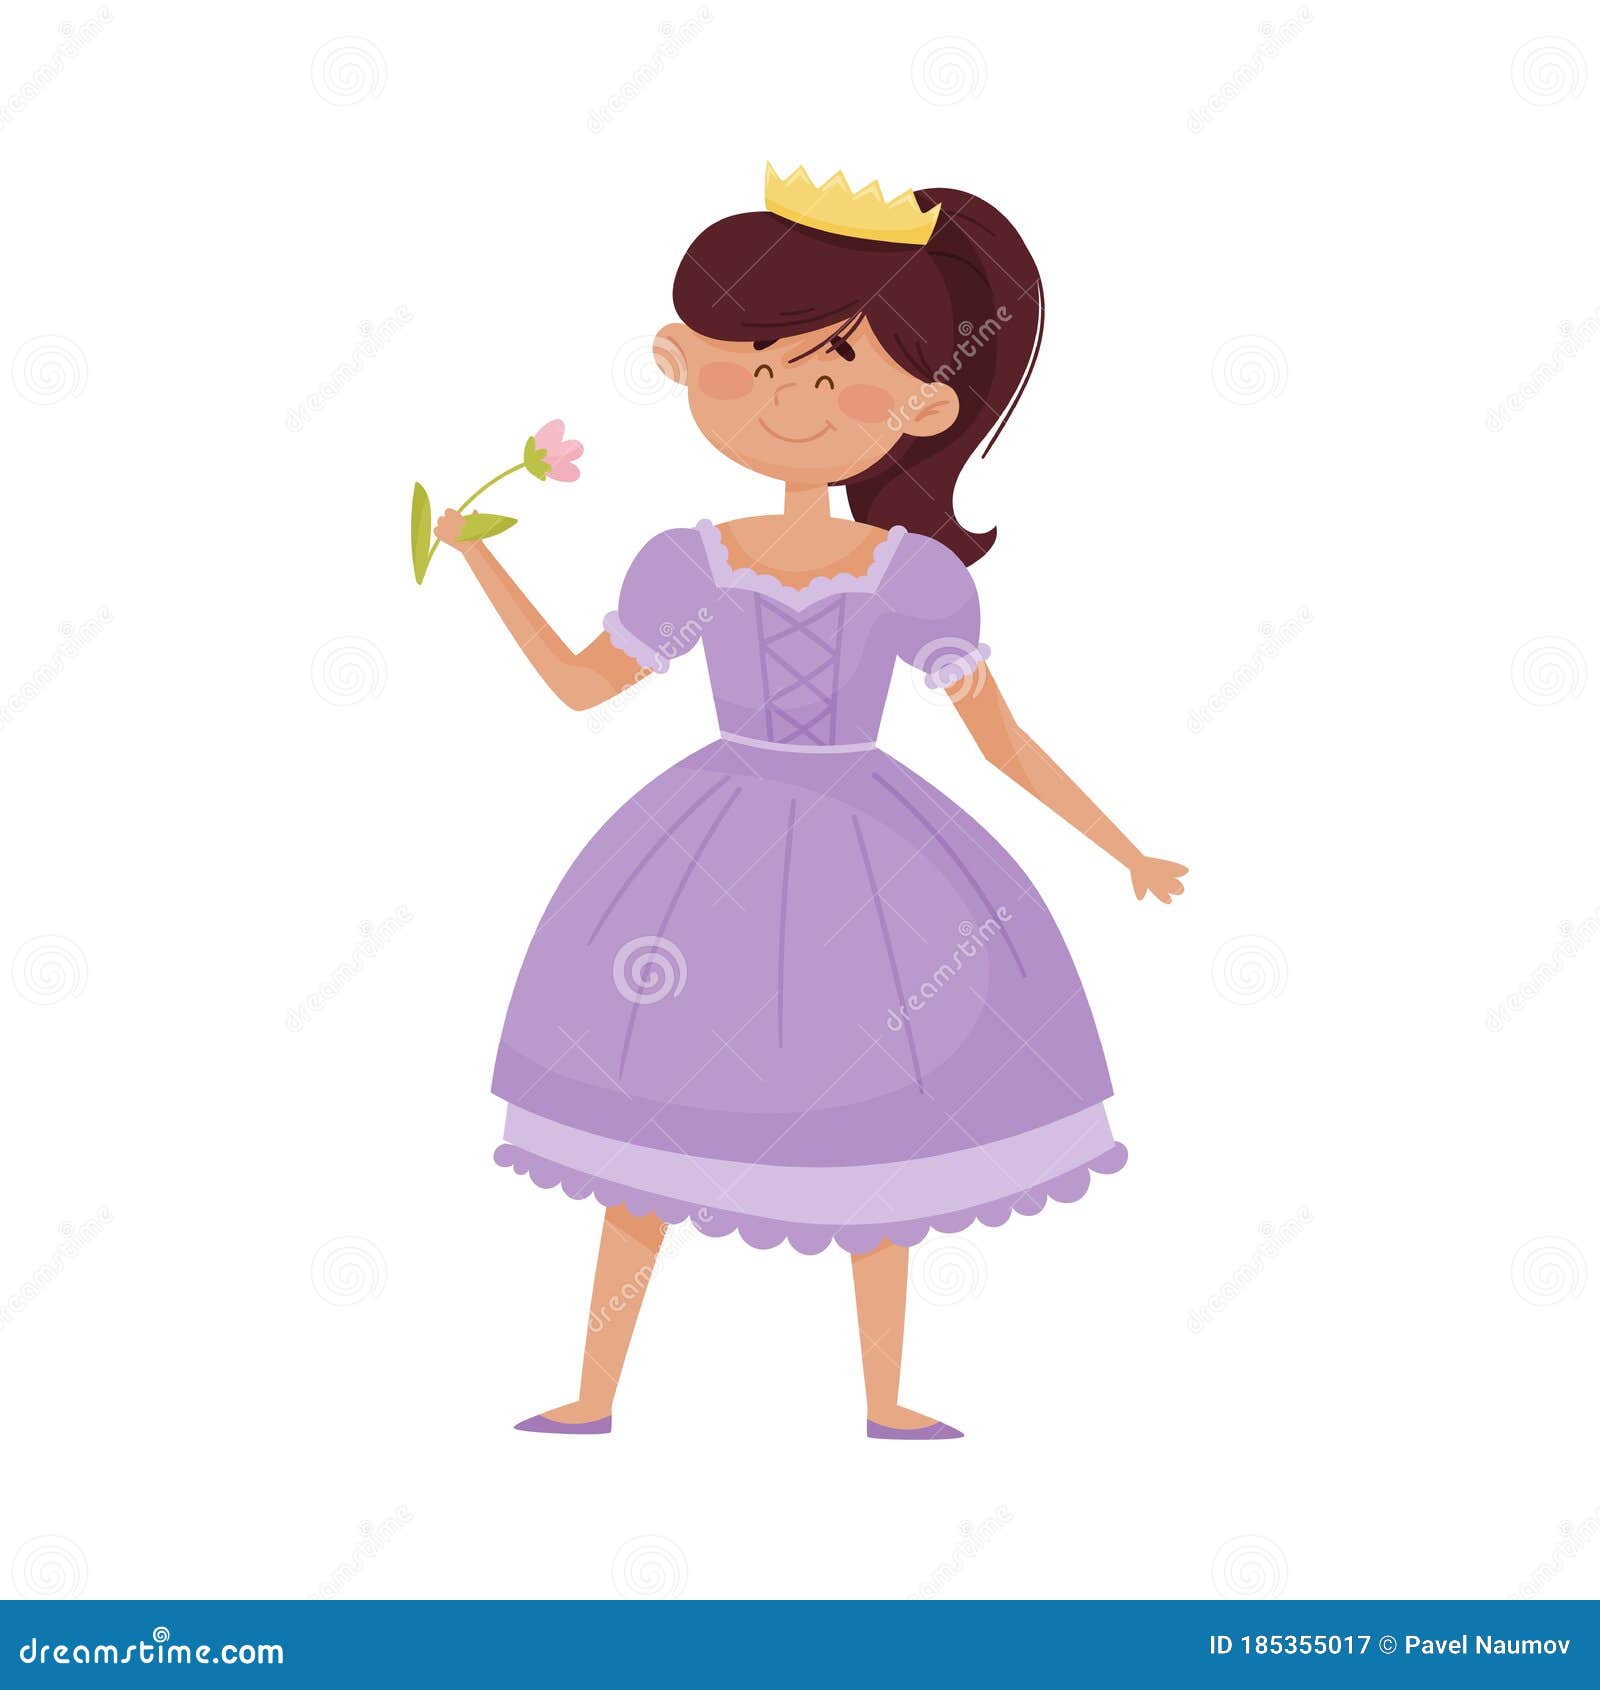 Smiling Princess With Dark Hair Wearing Crown And Dressy ...